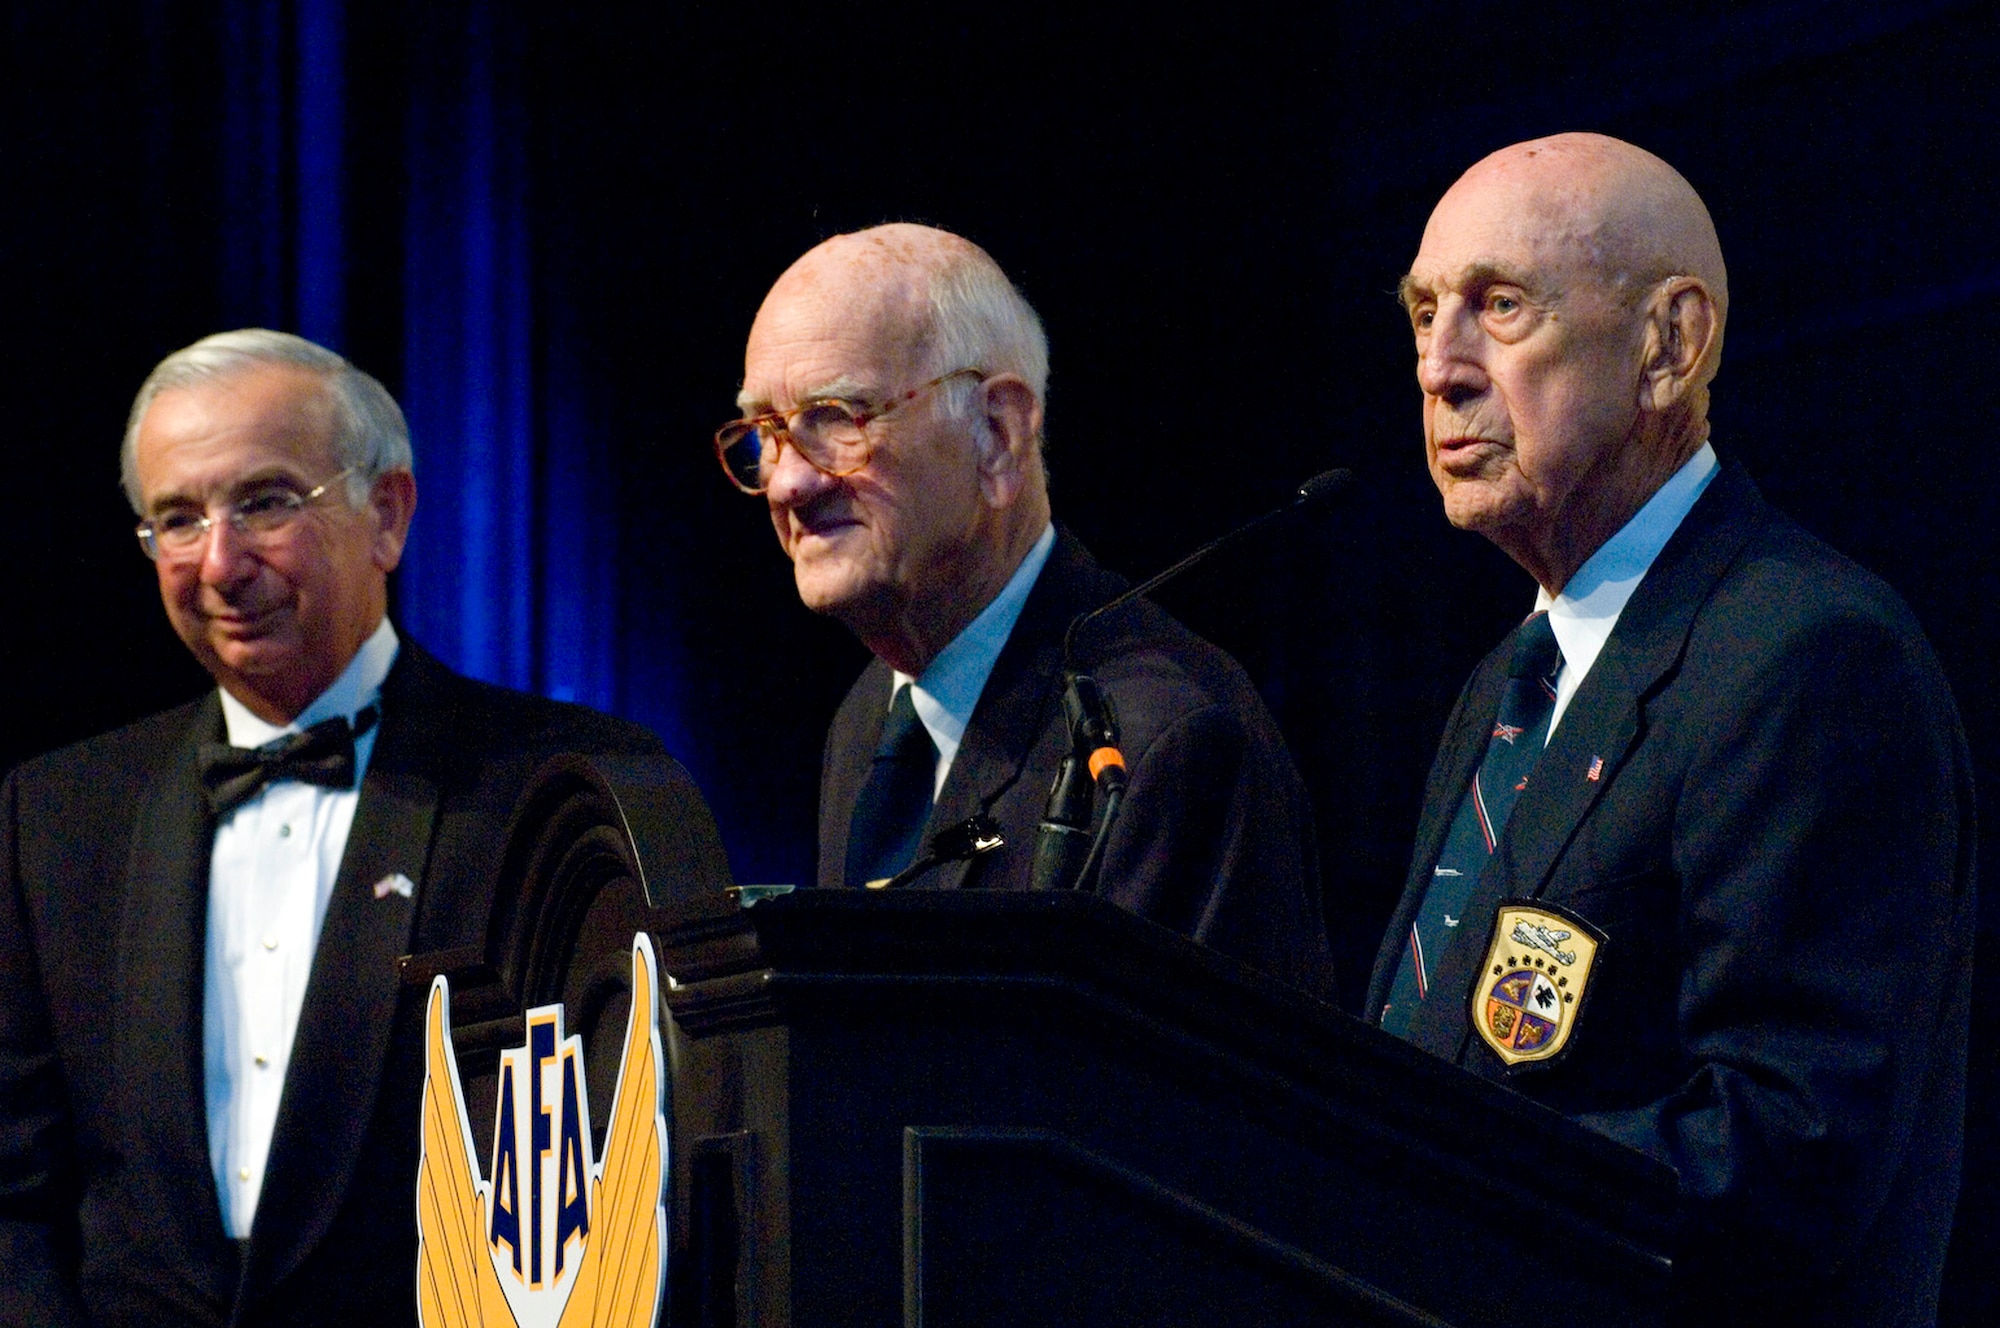 Joseph Sutter presents retired Maj. Thomas Griffin and retired Lt. Col. Richard Cole the Lifetime Achievement Award at the Air Force anniversary dinner Sept. 16, 2009, at the Gaylord National Hotel and Convention Center in National Harbor, Md. Major Griffin and Colonel Cole are members of the Doolittle Raiders. Mr. Sutter is the Air Force Association chairman of the board. The dinner was the end of the 2009 Air Force Association Air & Space Conference and Technology Exposition. (U.S. Air Force photo/Staff Sgt. Desiree N. Palacios) 